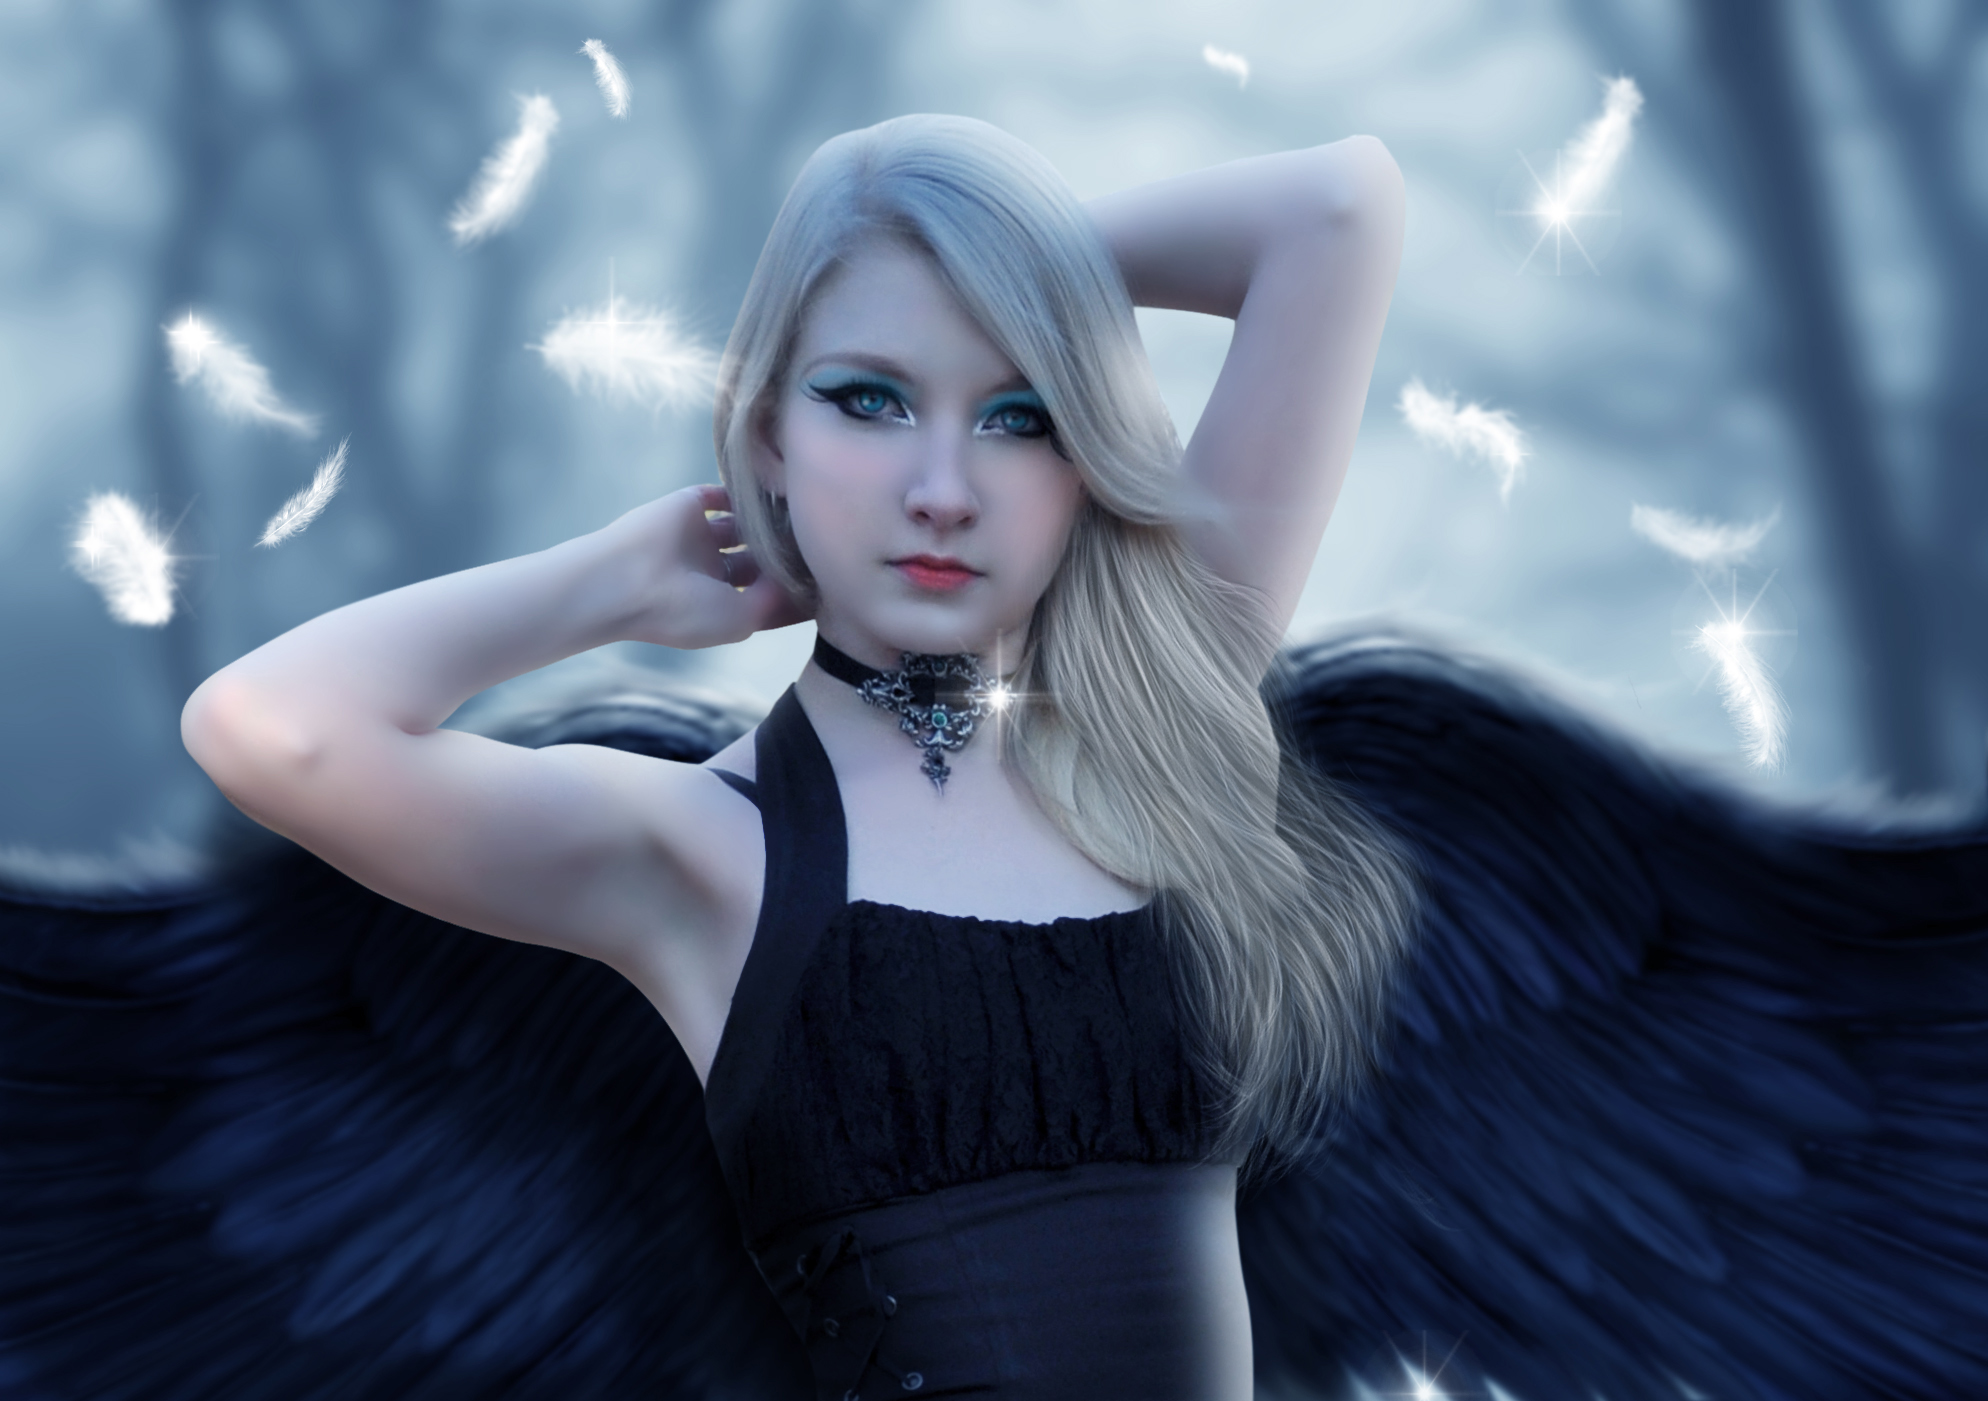 Fallen Angel - Share your work - Affinity | Forum